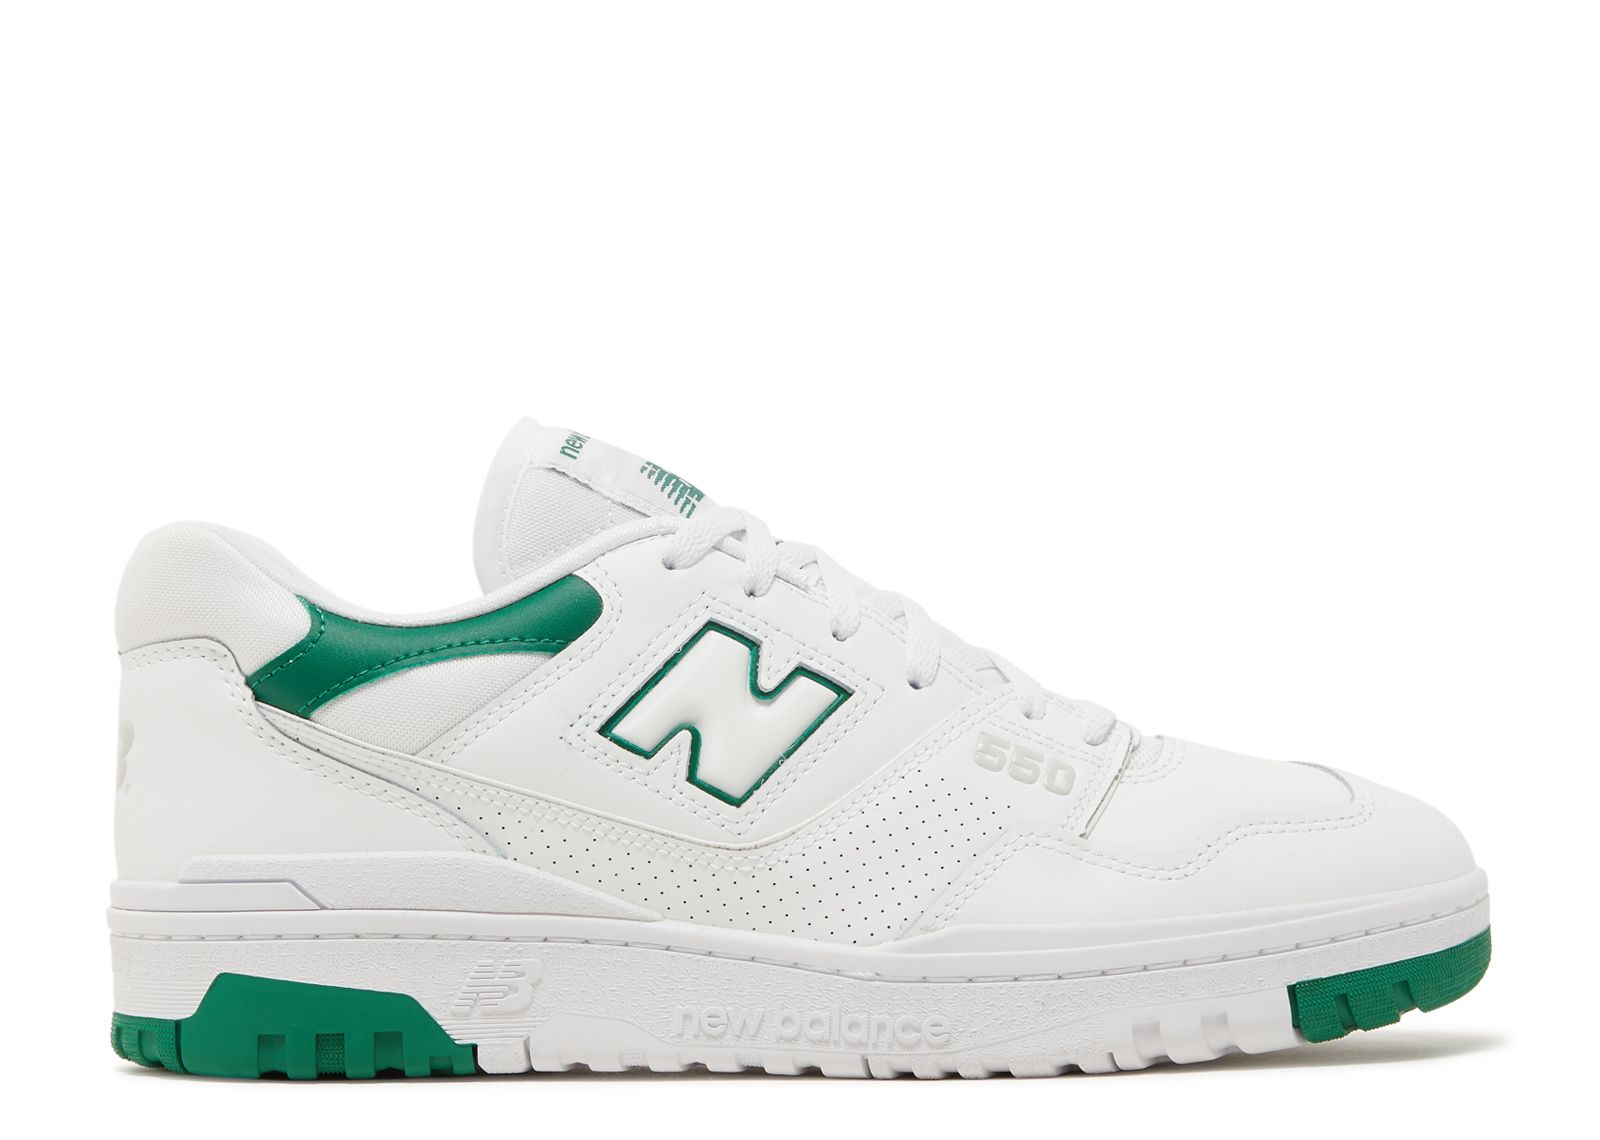 New Balance 550 Surfaces in Verdigris Colorway